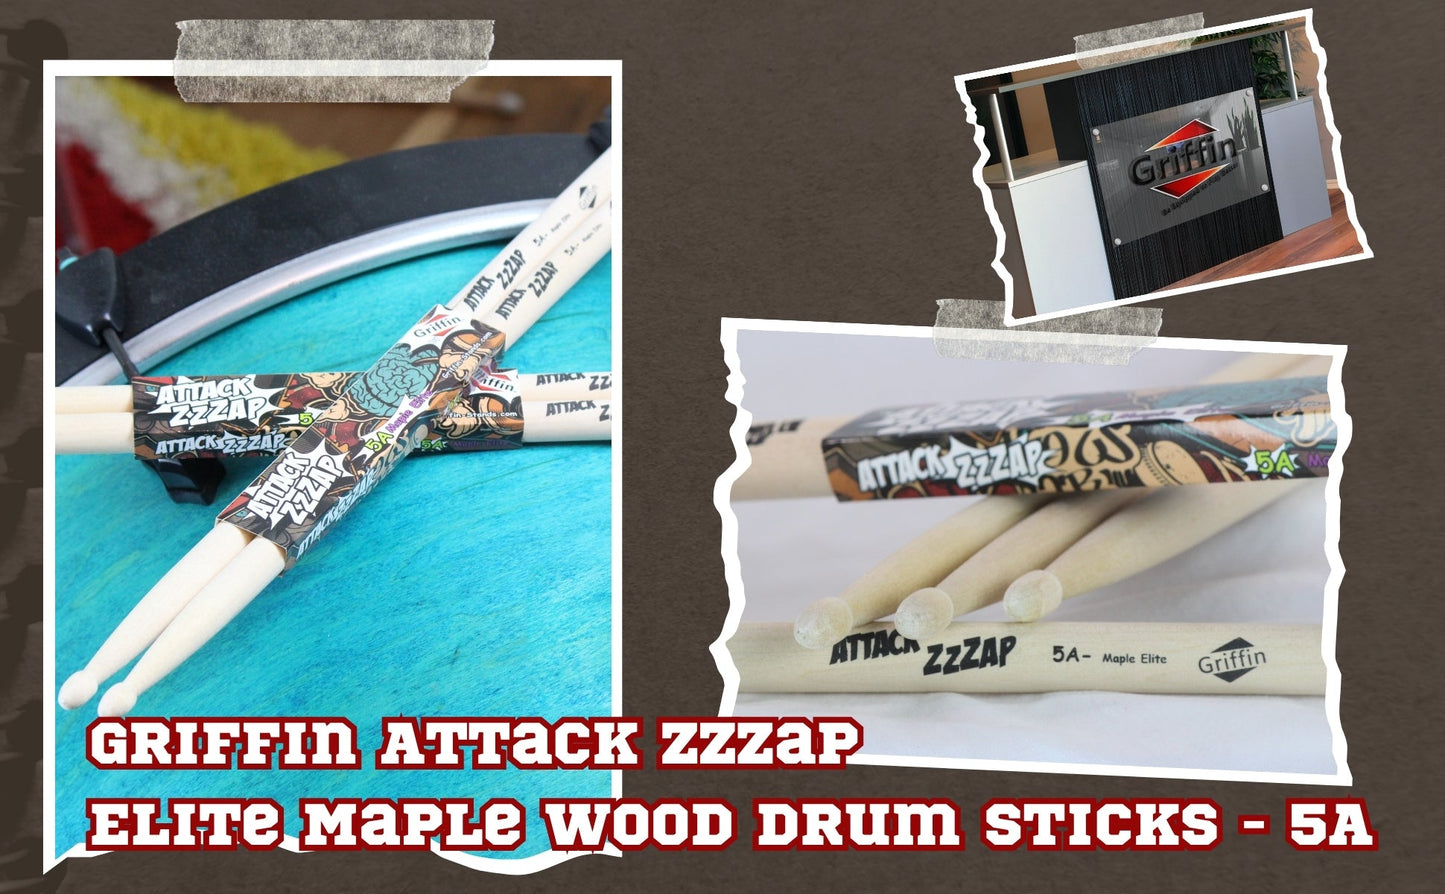 GRIFFIN Attack Zzzap Drum Sticks - 24 Pairs of Select Elite Maple Wood Size 5A Drummers Percussion